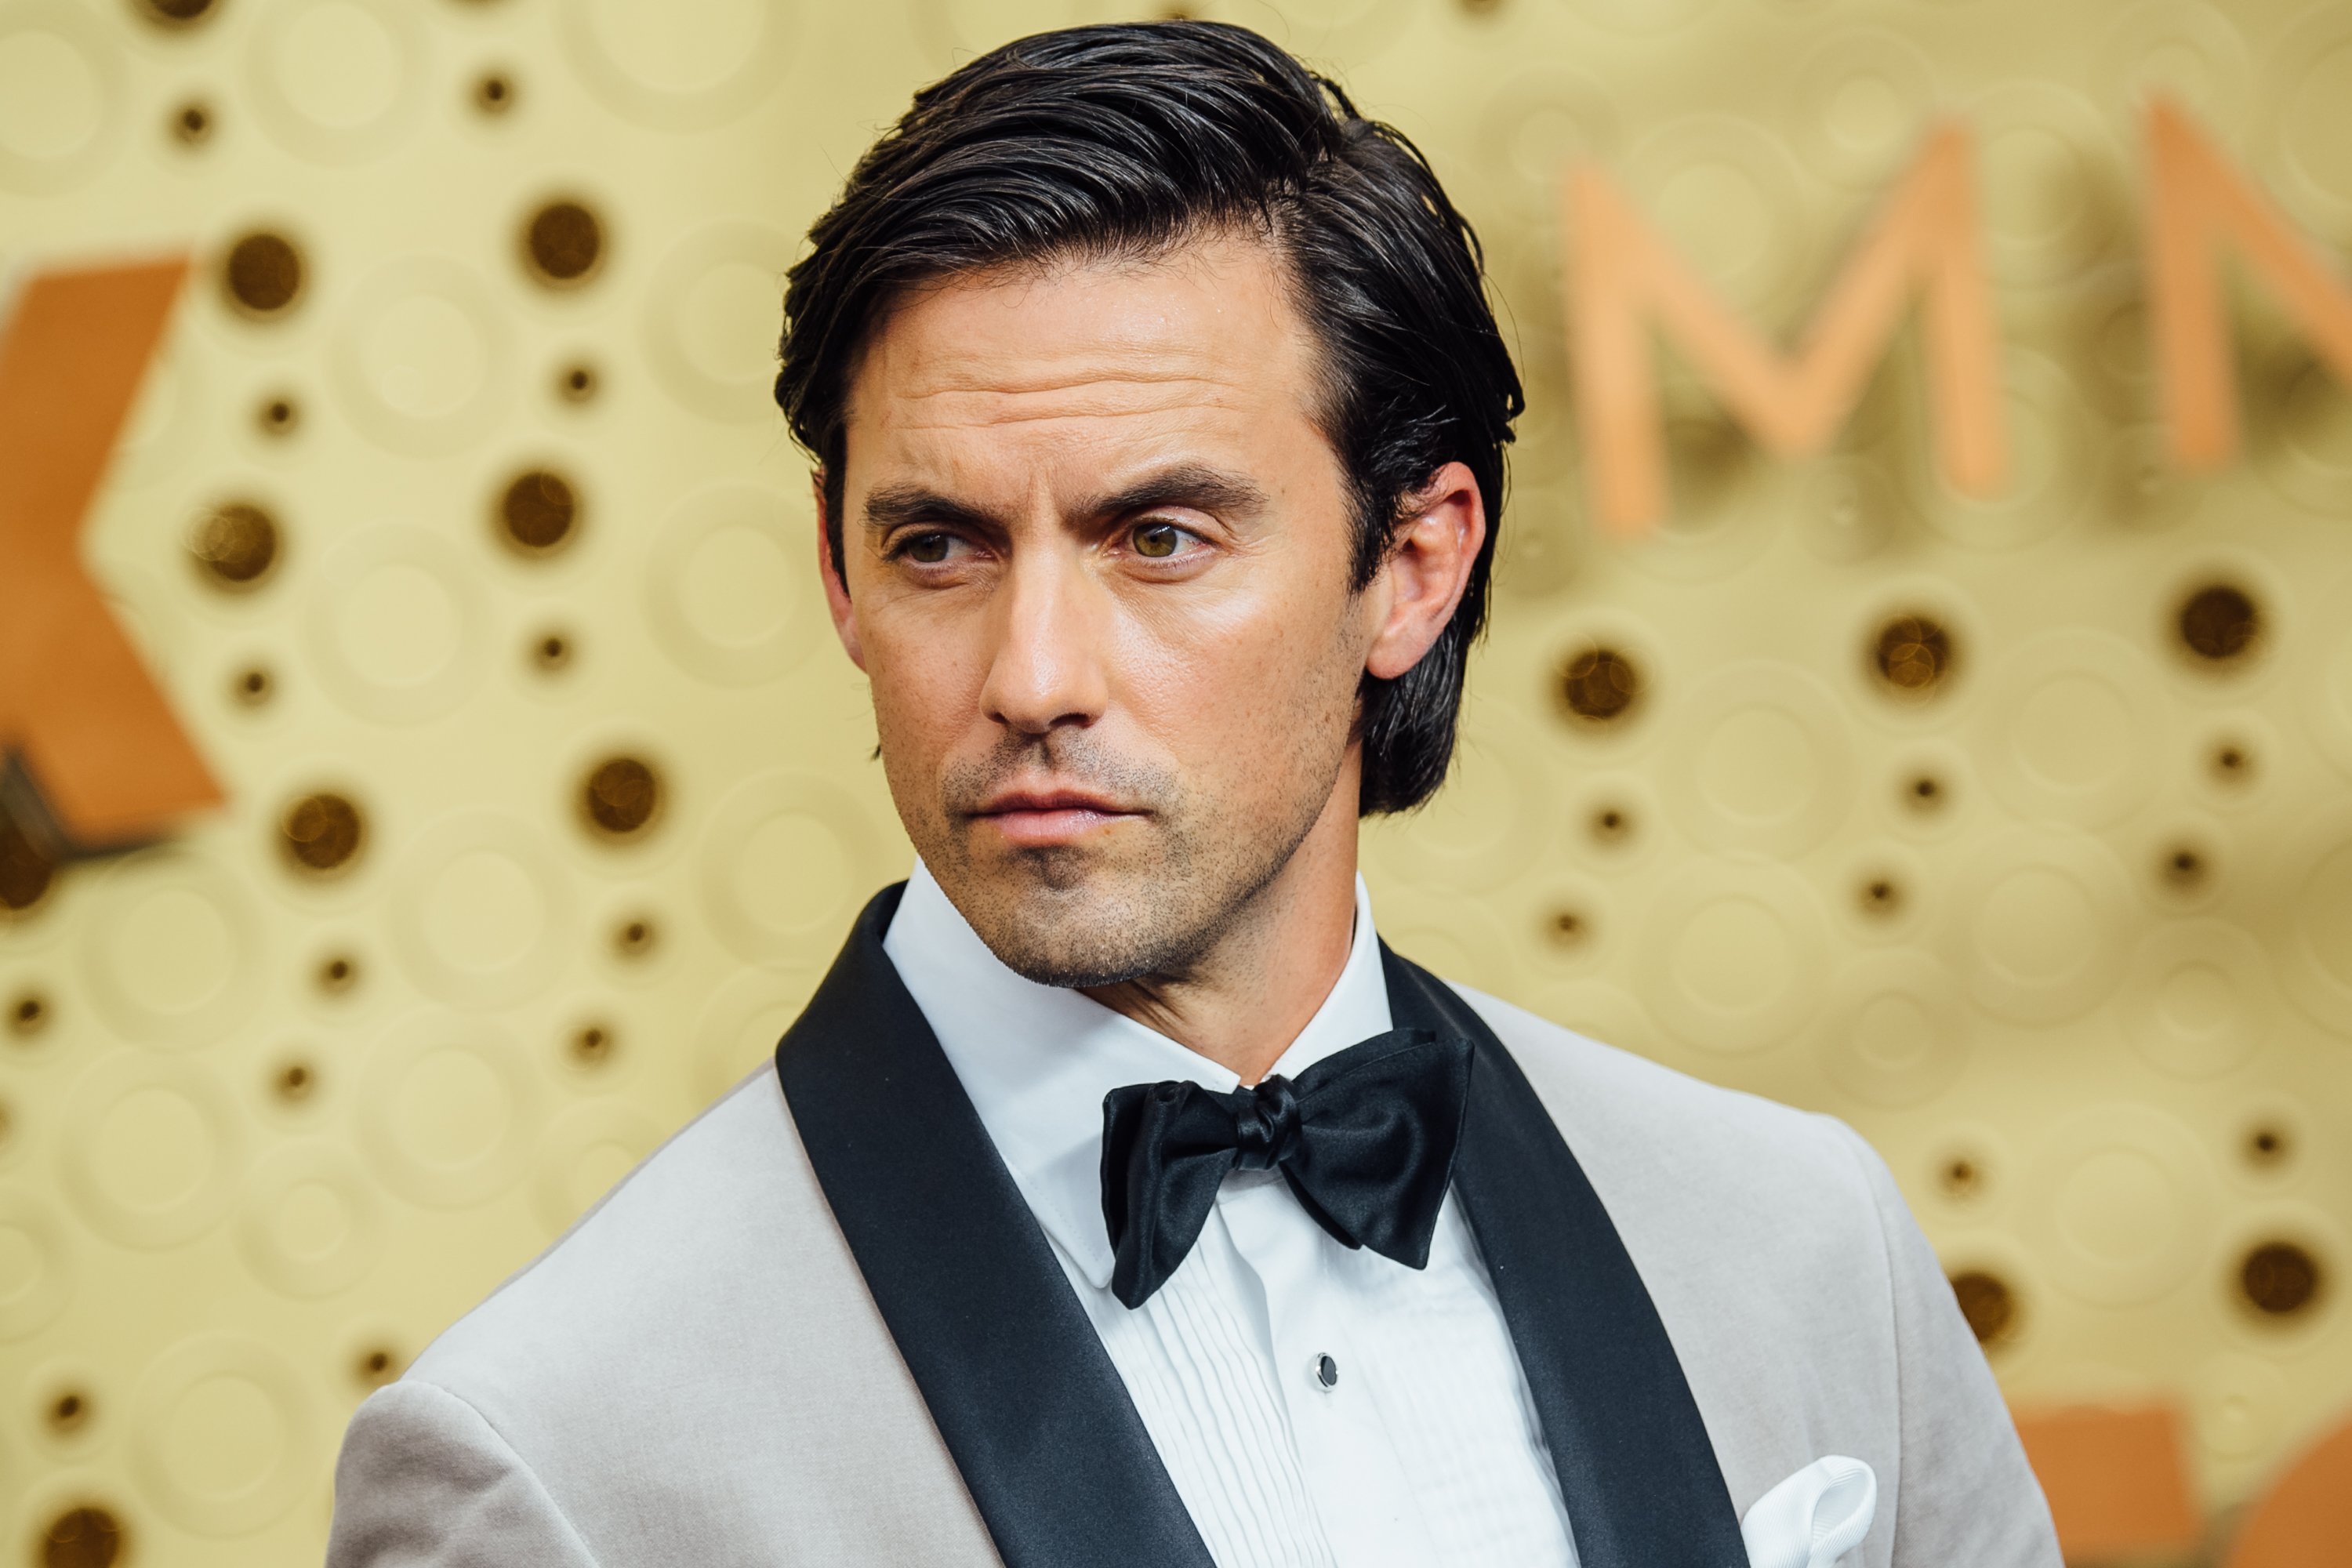 Milo Ventimiglia arrives at the 71st Emmy Awards at Microsoft Theater on September 22, 2019 in Los Angeles, California. | Source: Getty Images